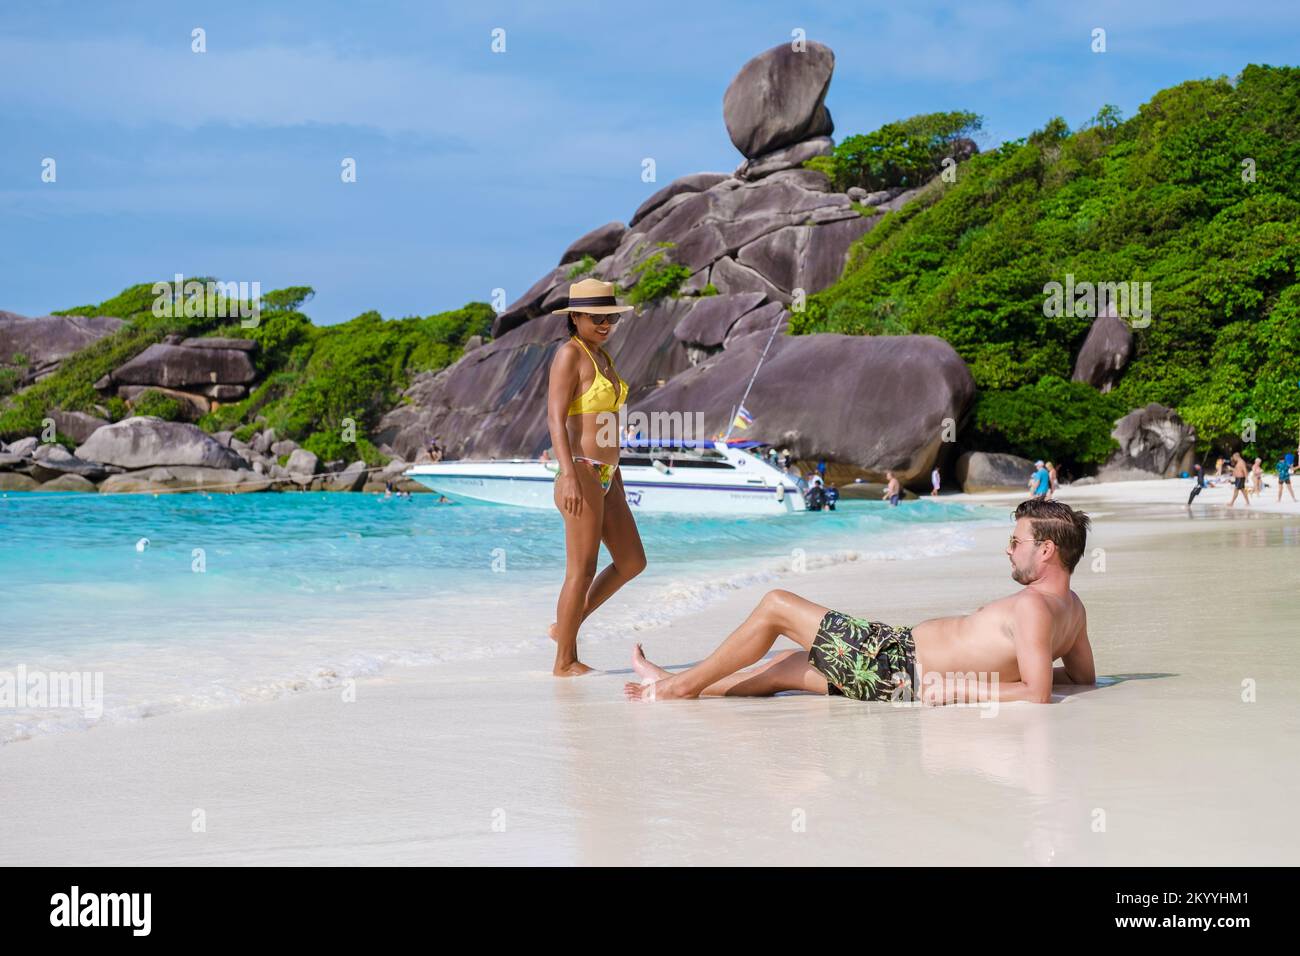 Asian Thai women and Caucasian men on the beach of the Similan Islands in Thailand with turqouse colored ocean and white sand.  Stock Photo